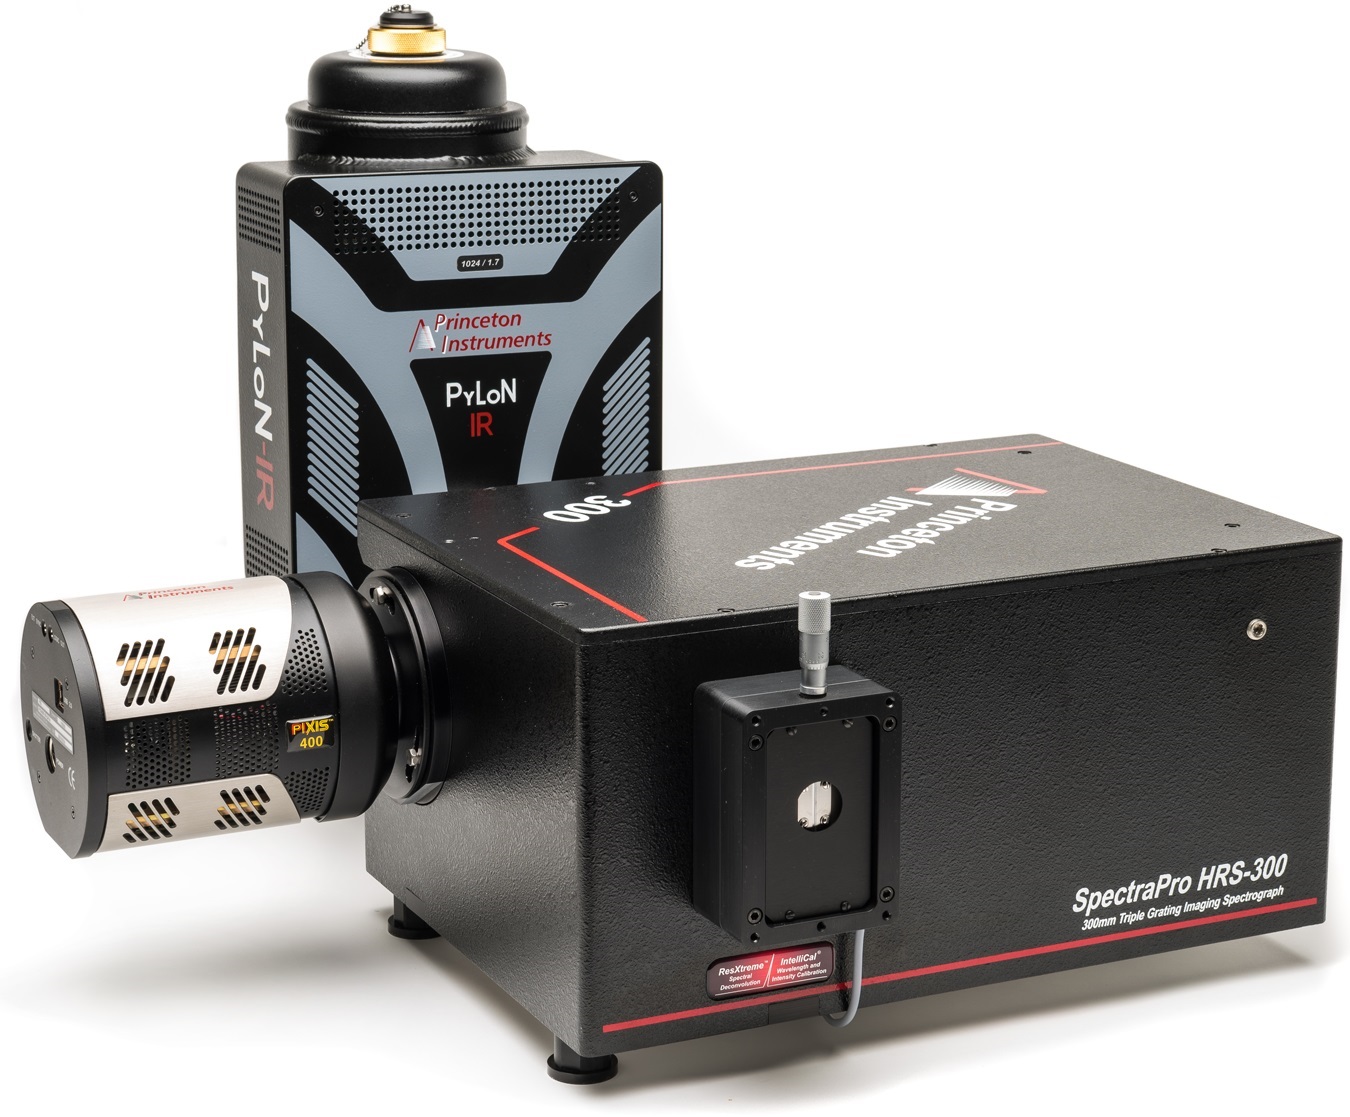 Versatile SpectraPro HRS-300 spectrograph shown with Princeton Instruments’ PyLoN-IR InGaAs and PIXIS CCD cameras.